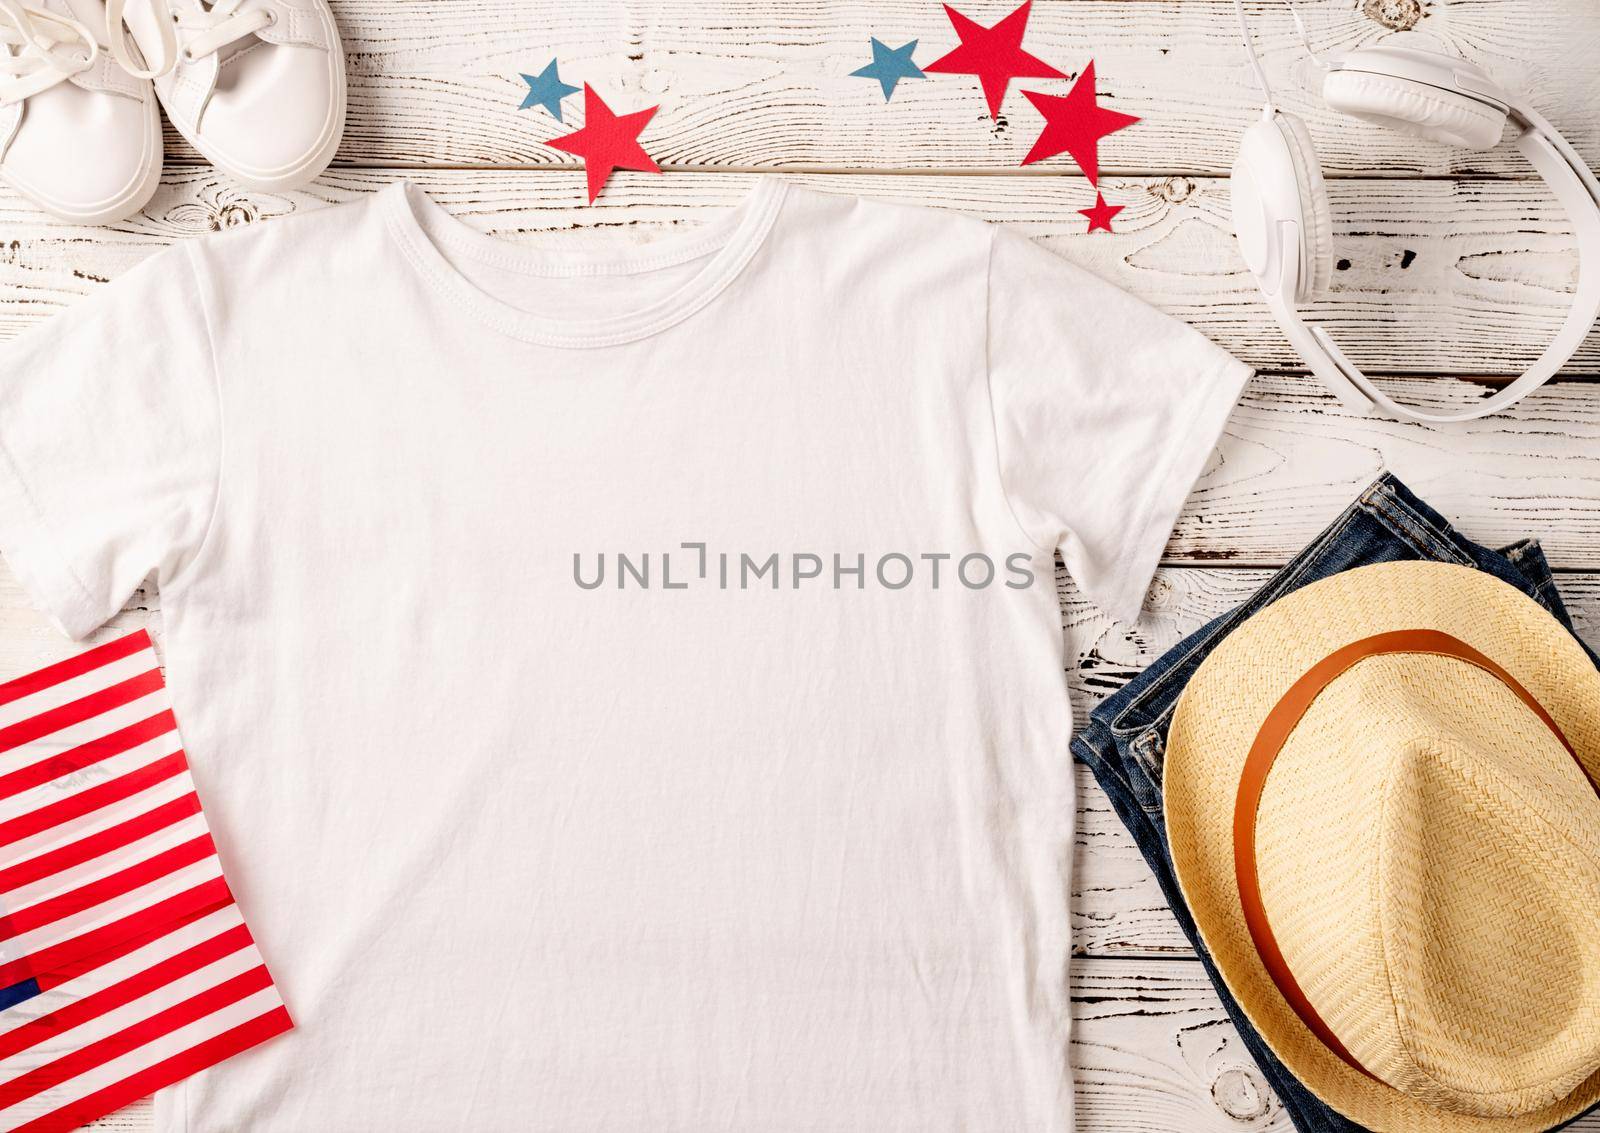 USA Memorial day, Presidents day, Veterans day, Labor day, or 4th of July celebration. Mockup design polo t shirt for logo, top view on white wooden background with US flag and jeans